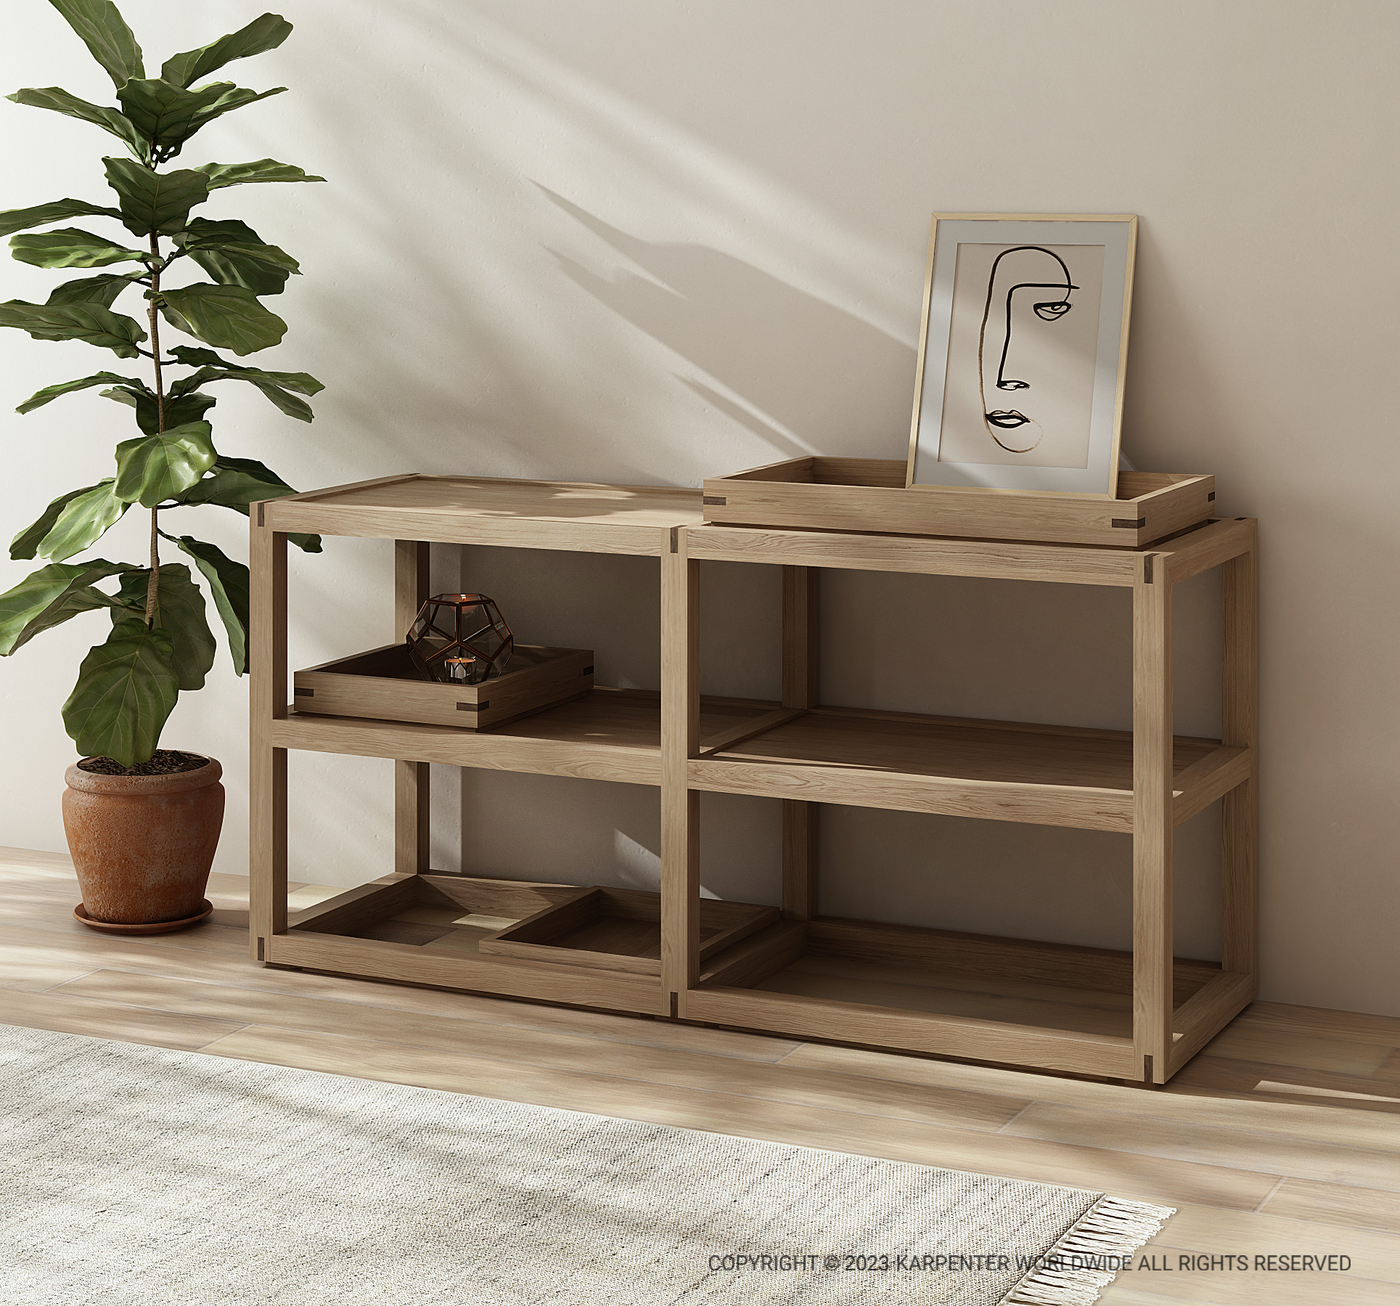 Up and Down Single Tray Side Table - European Oak